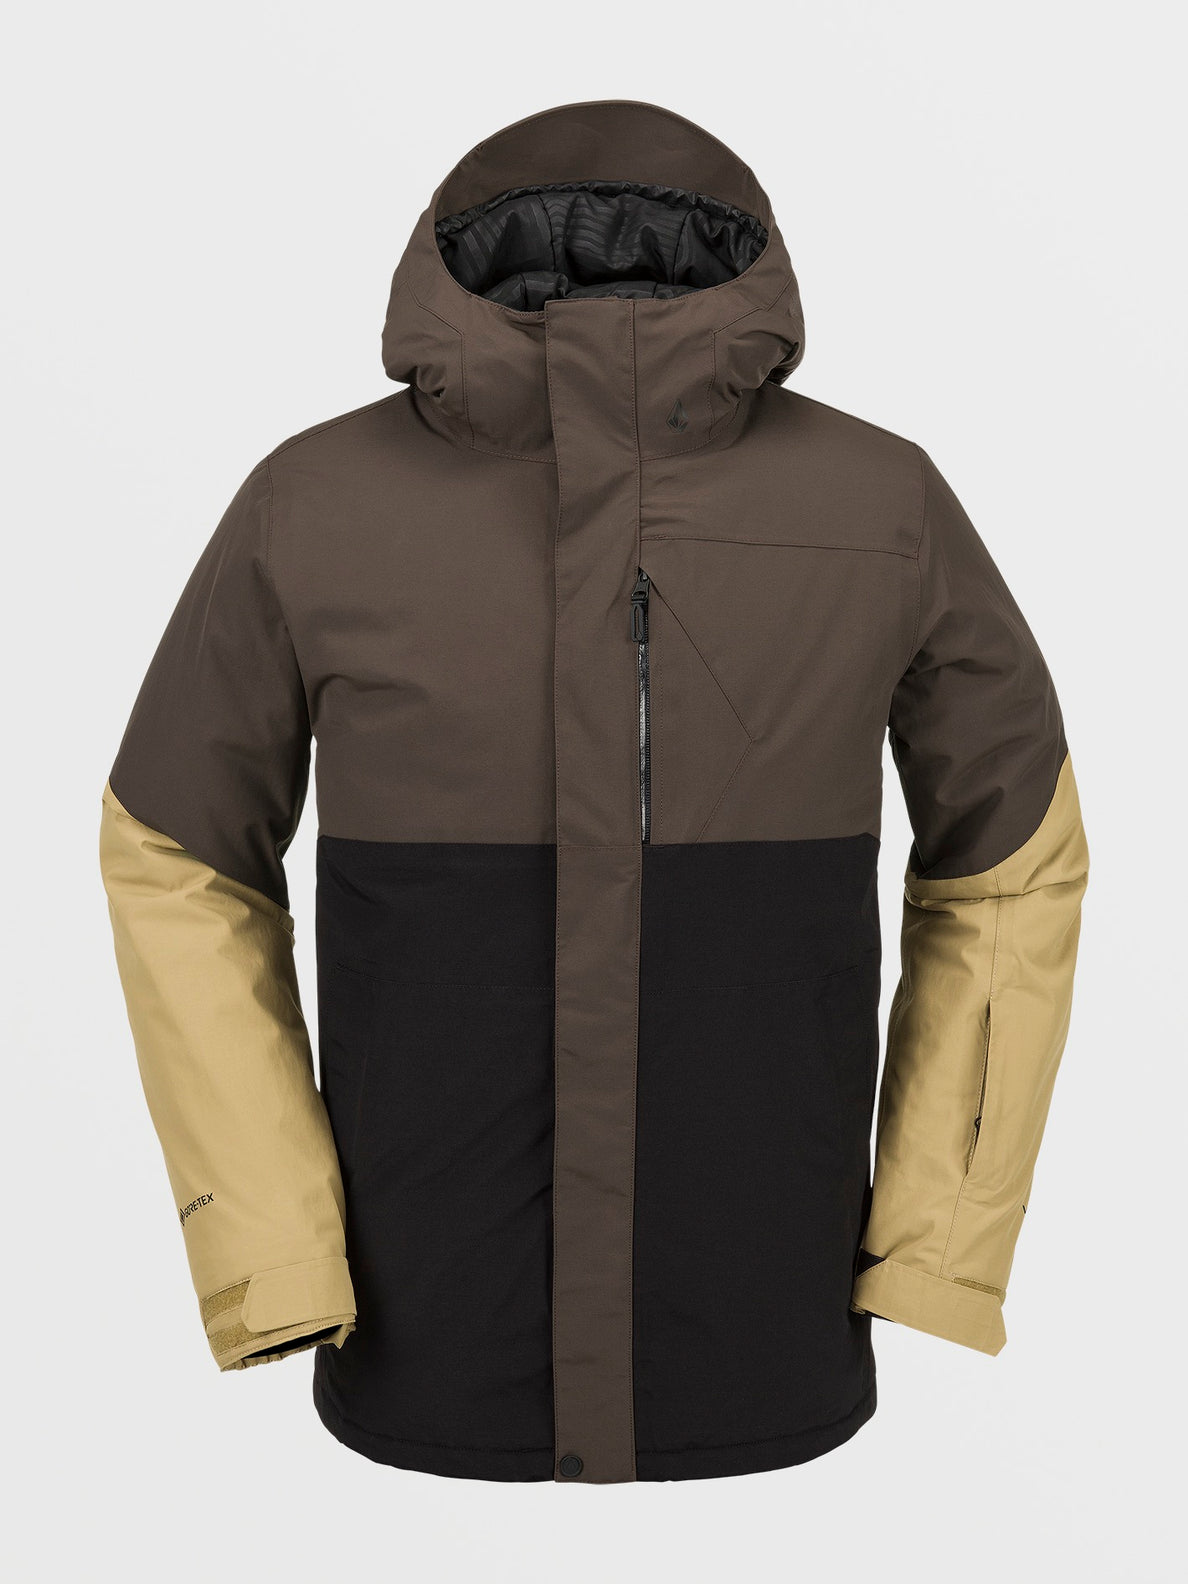 L Insulated Gore-Tex Jacket - BROWN (G0452403_BRN) [F]